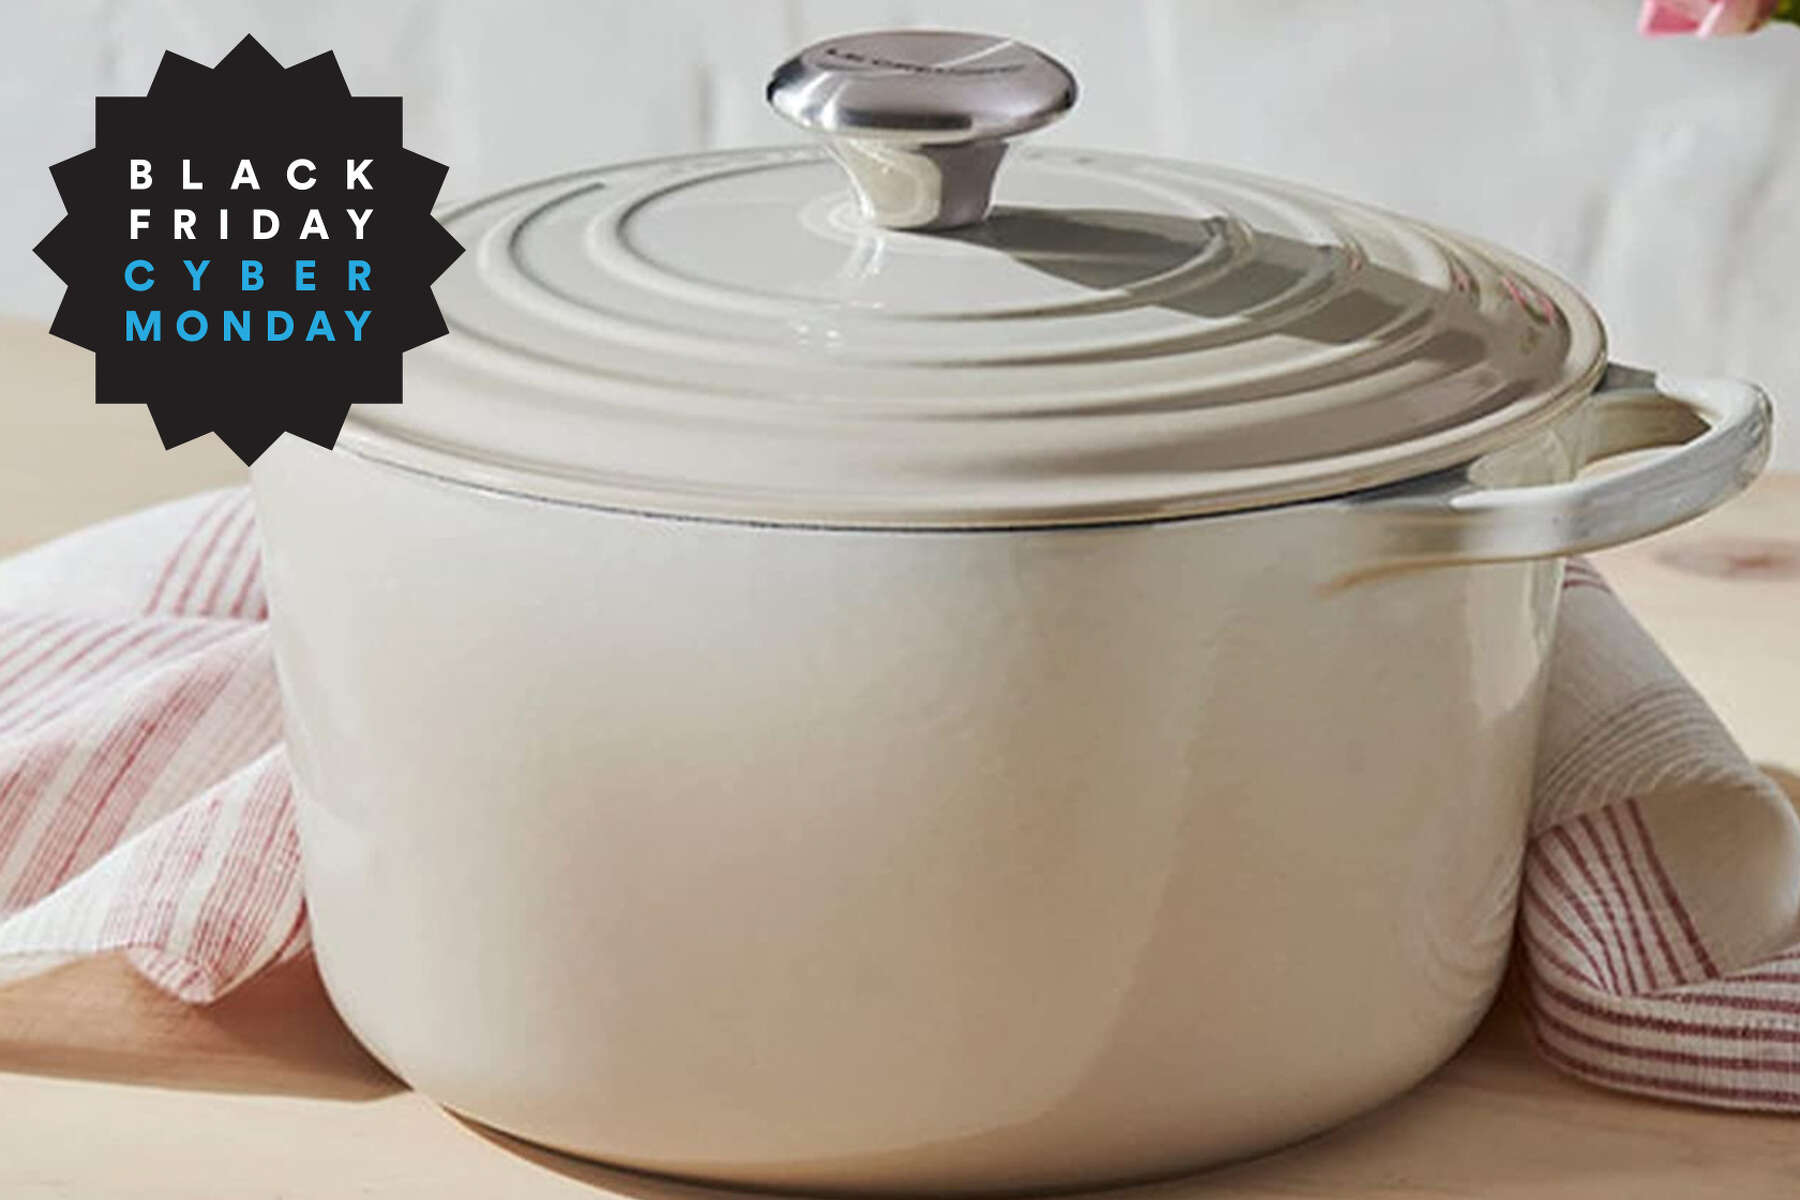 Le Creuset Is Dropping Deals on So Many Pieces, and Prices Start at $10